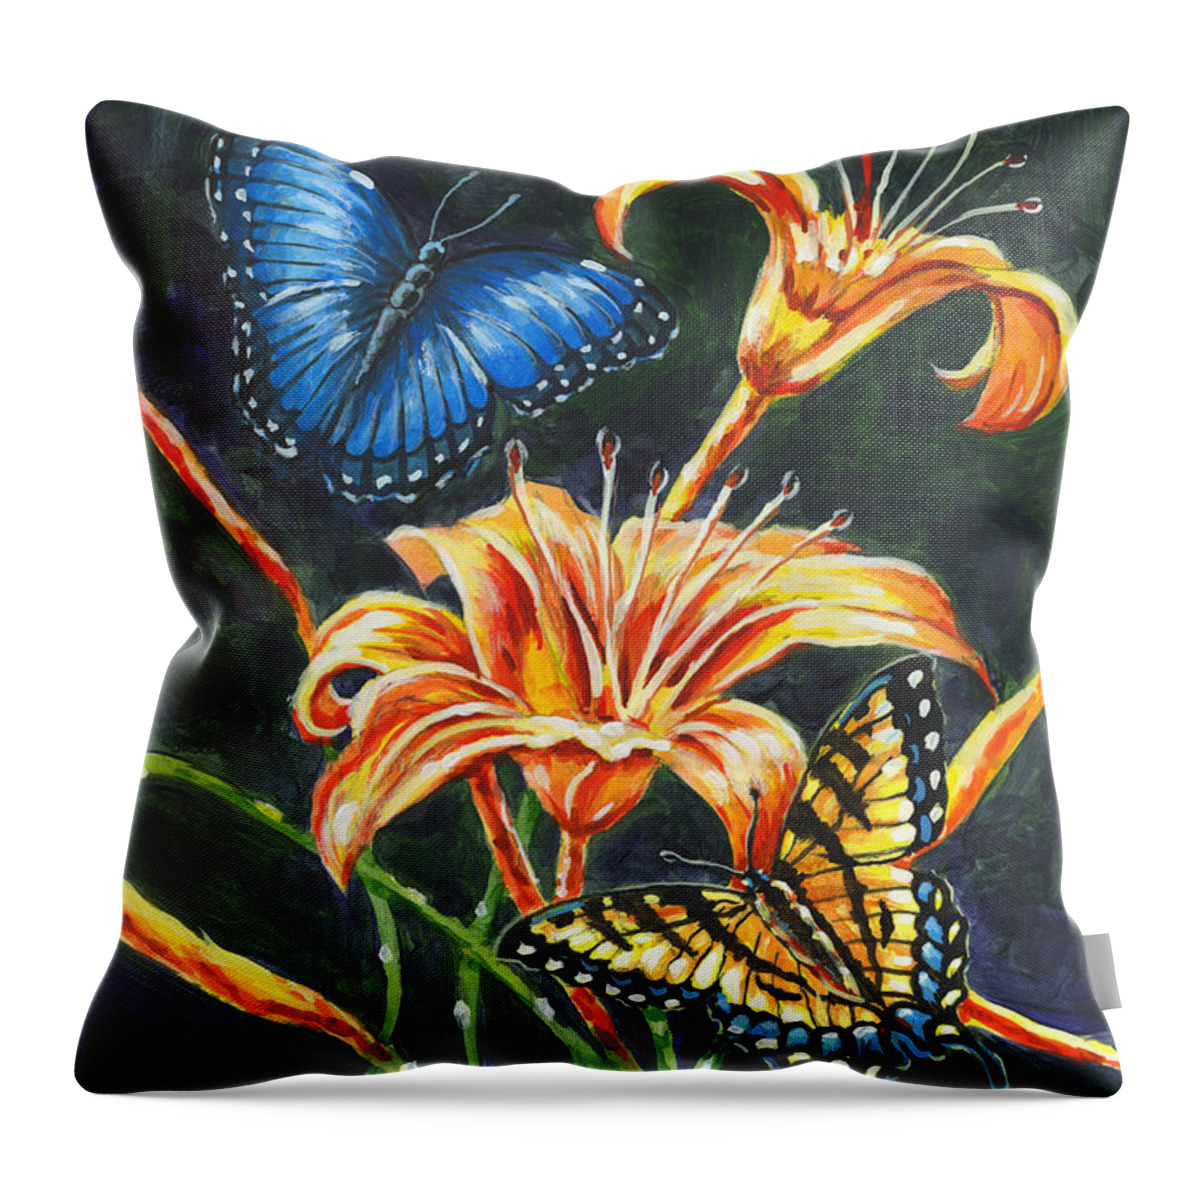 Butterfly Throw Pillow featuring the painting Butterflies And Flowers Sketch by Richard De Wolfe